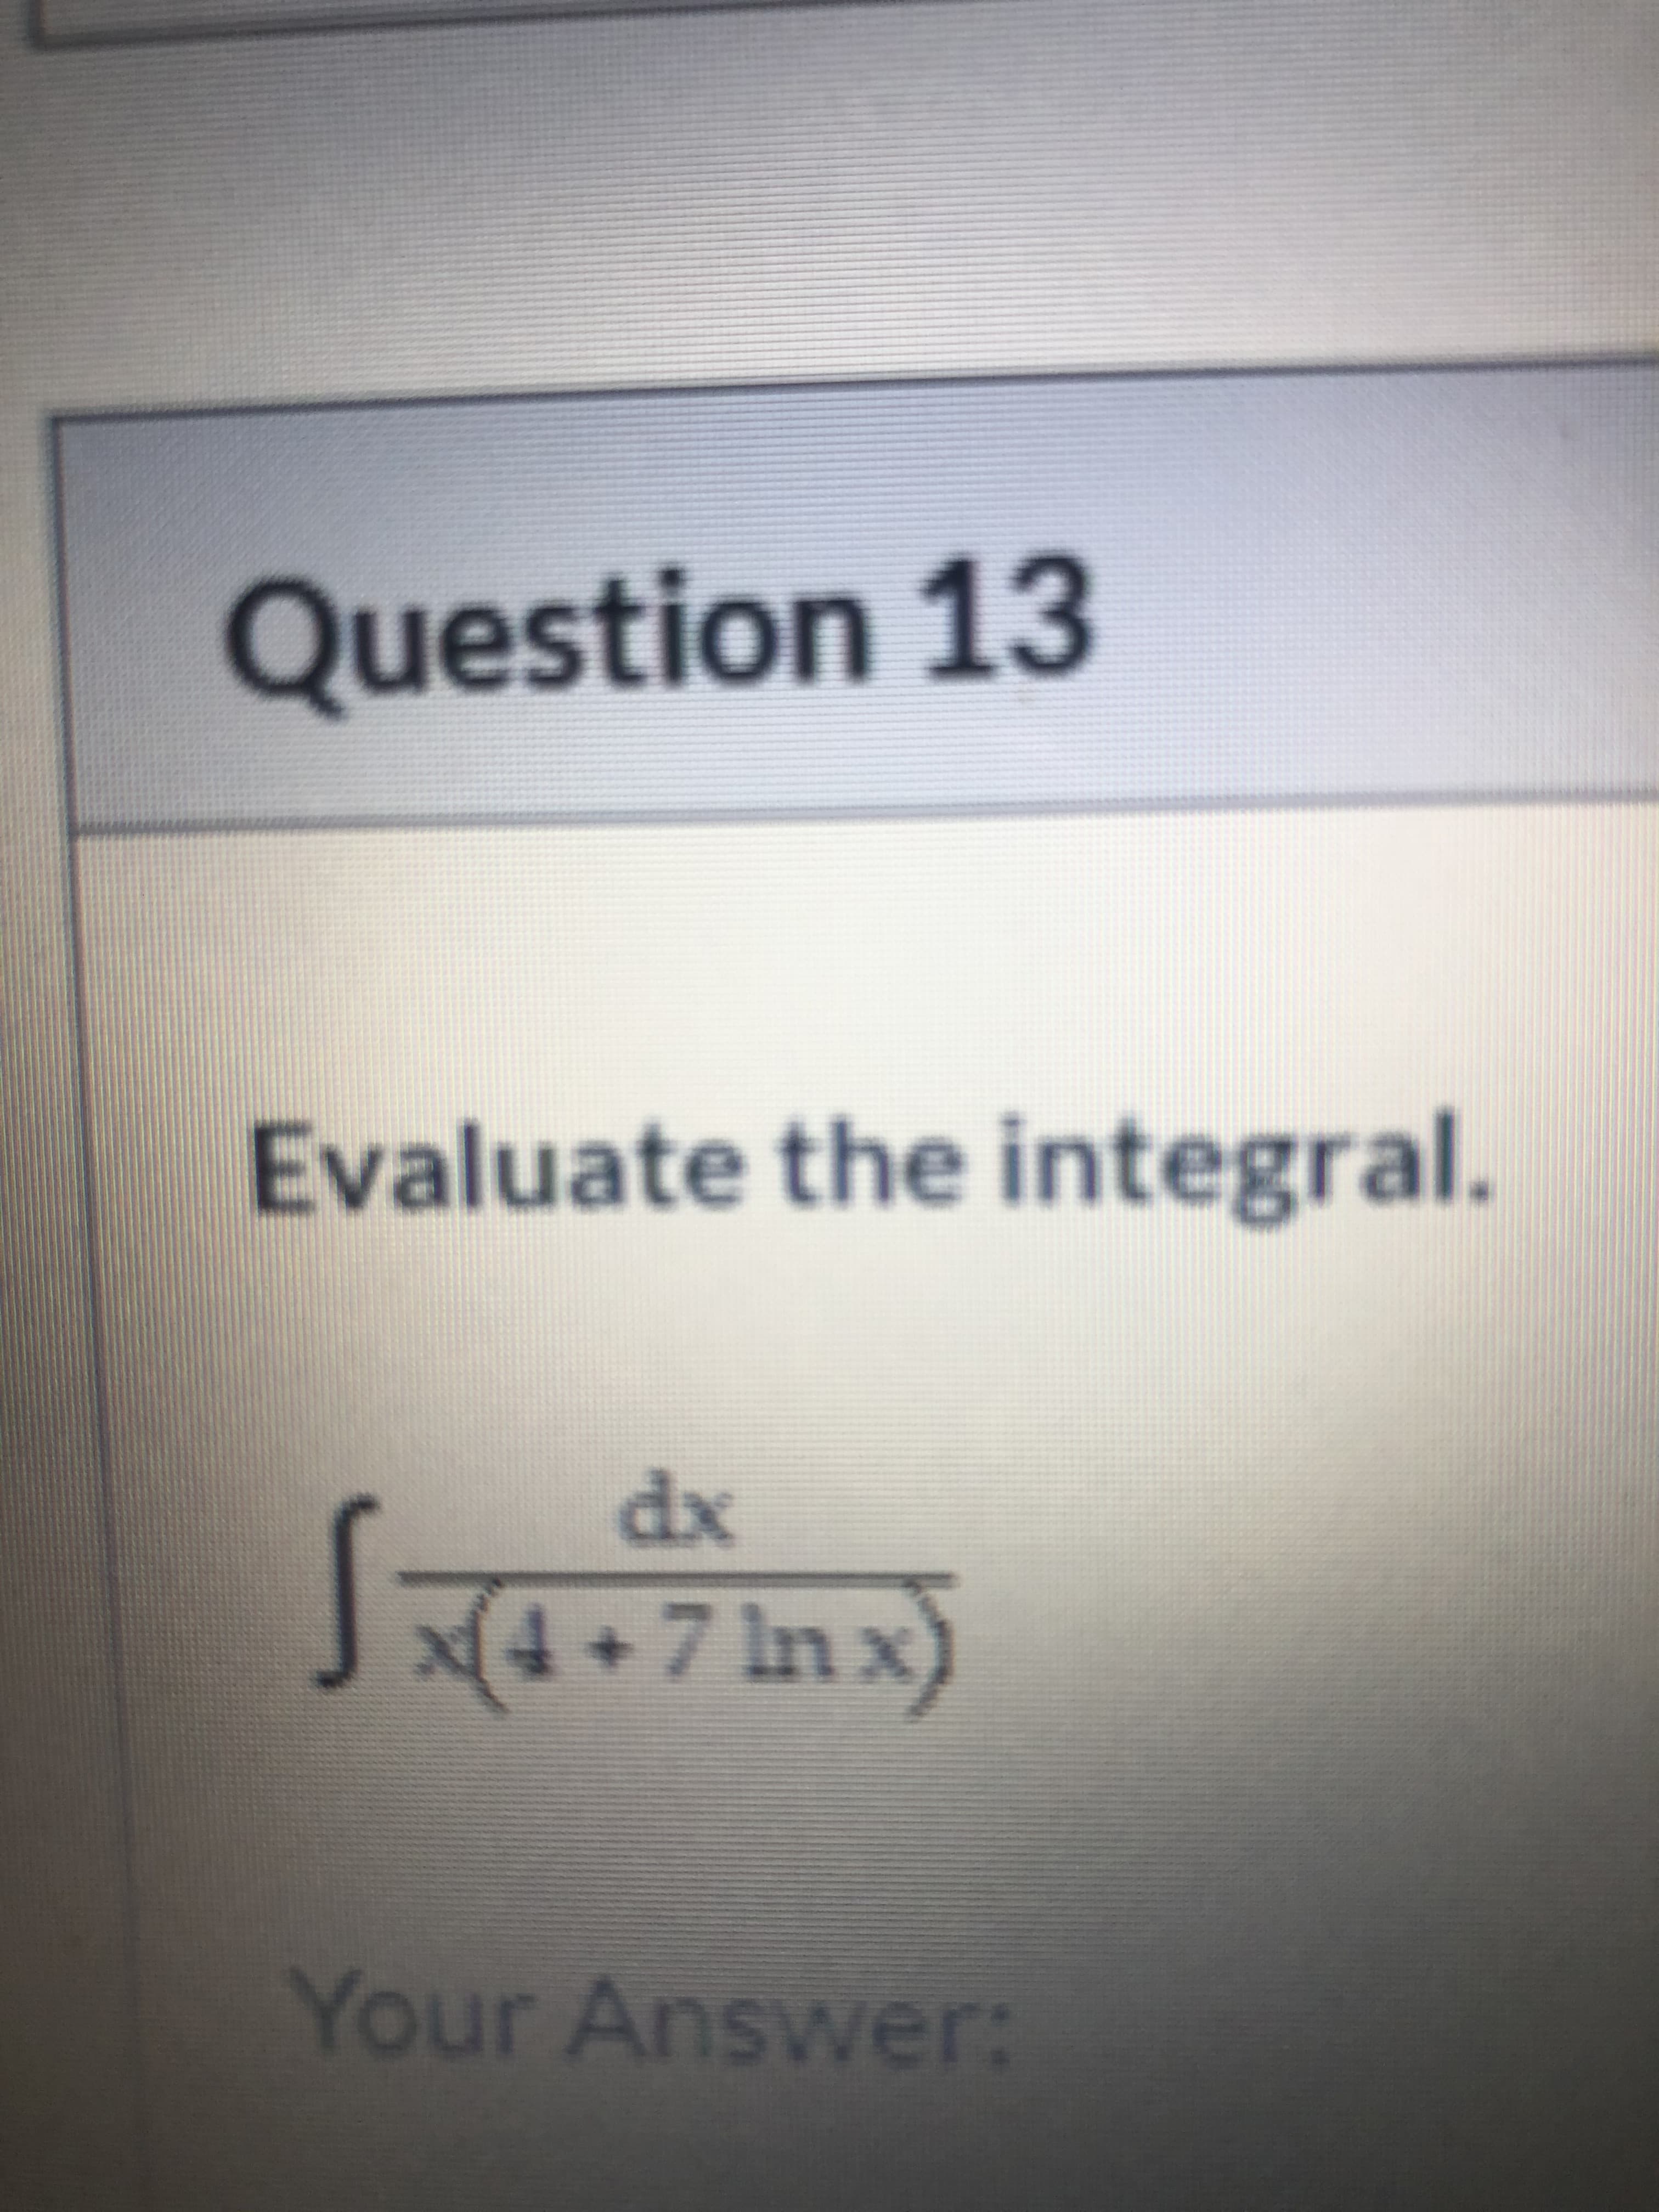 ate the integral.
dx
+ 7 ln x)
